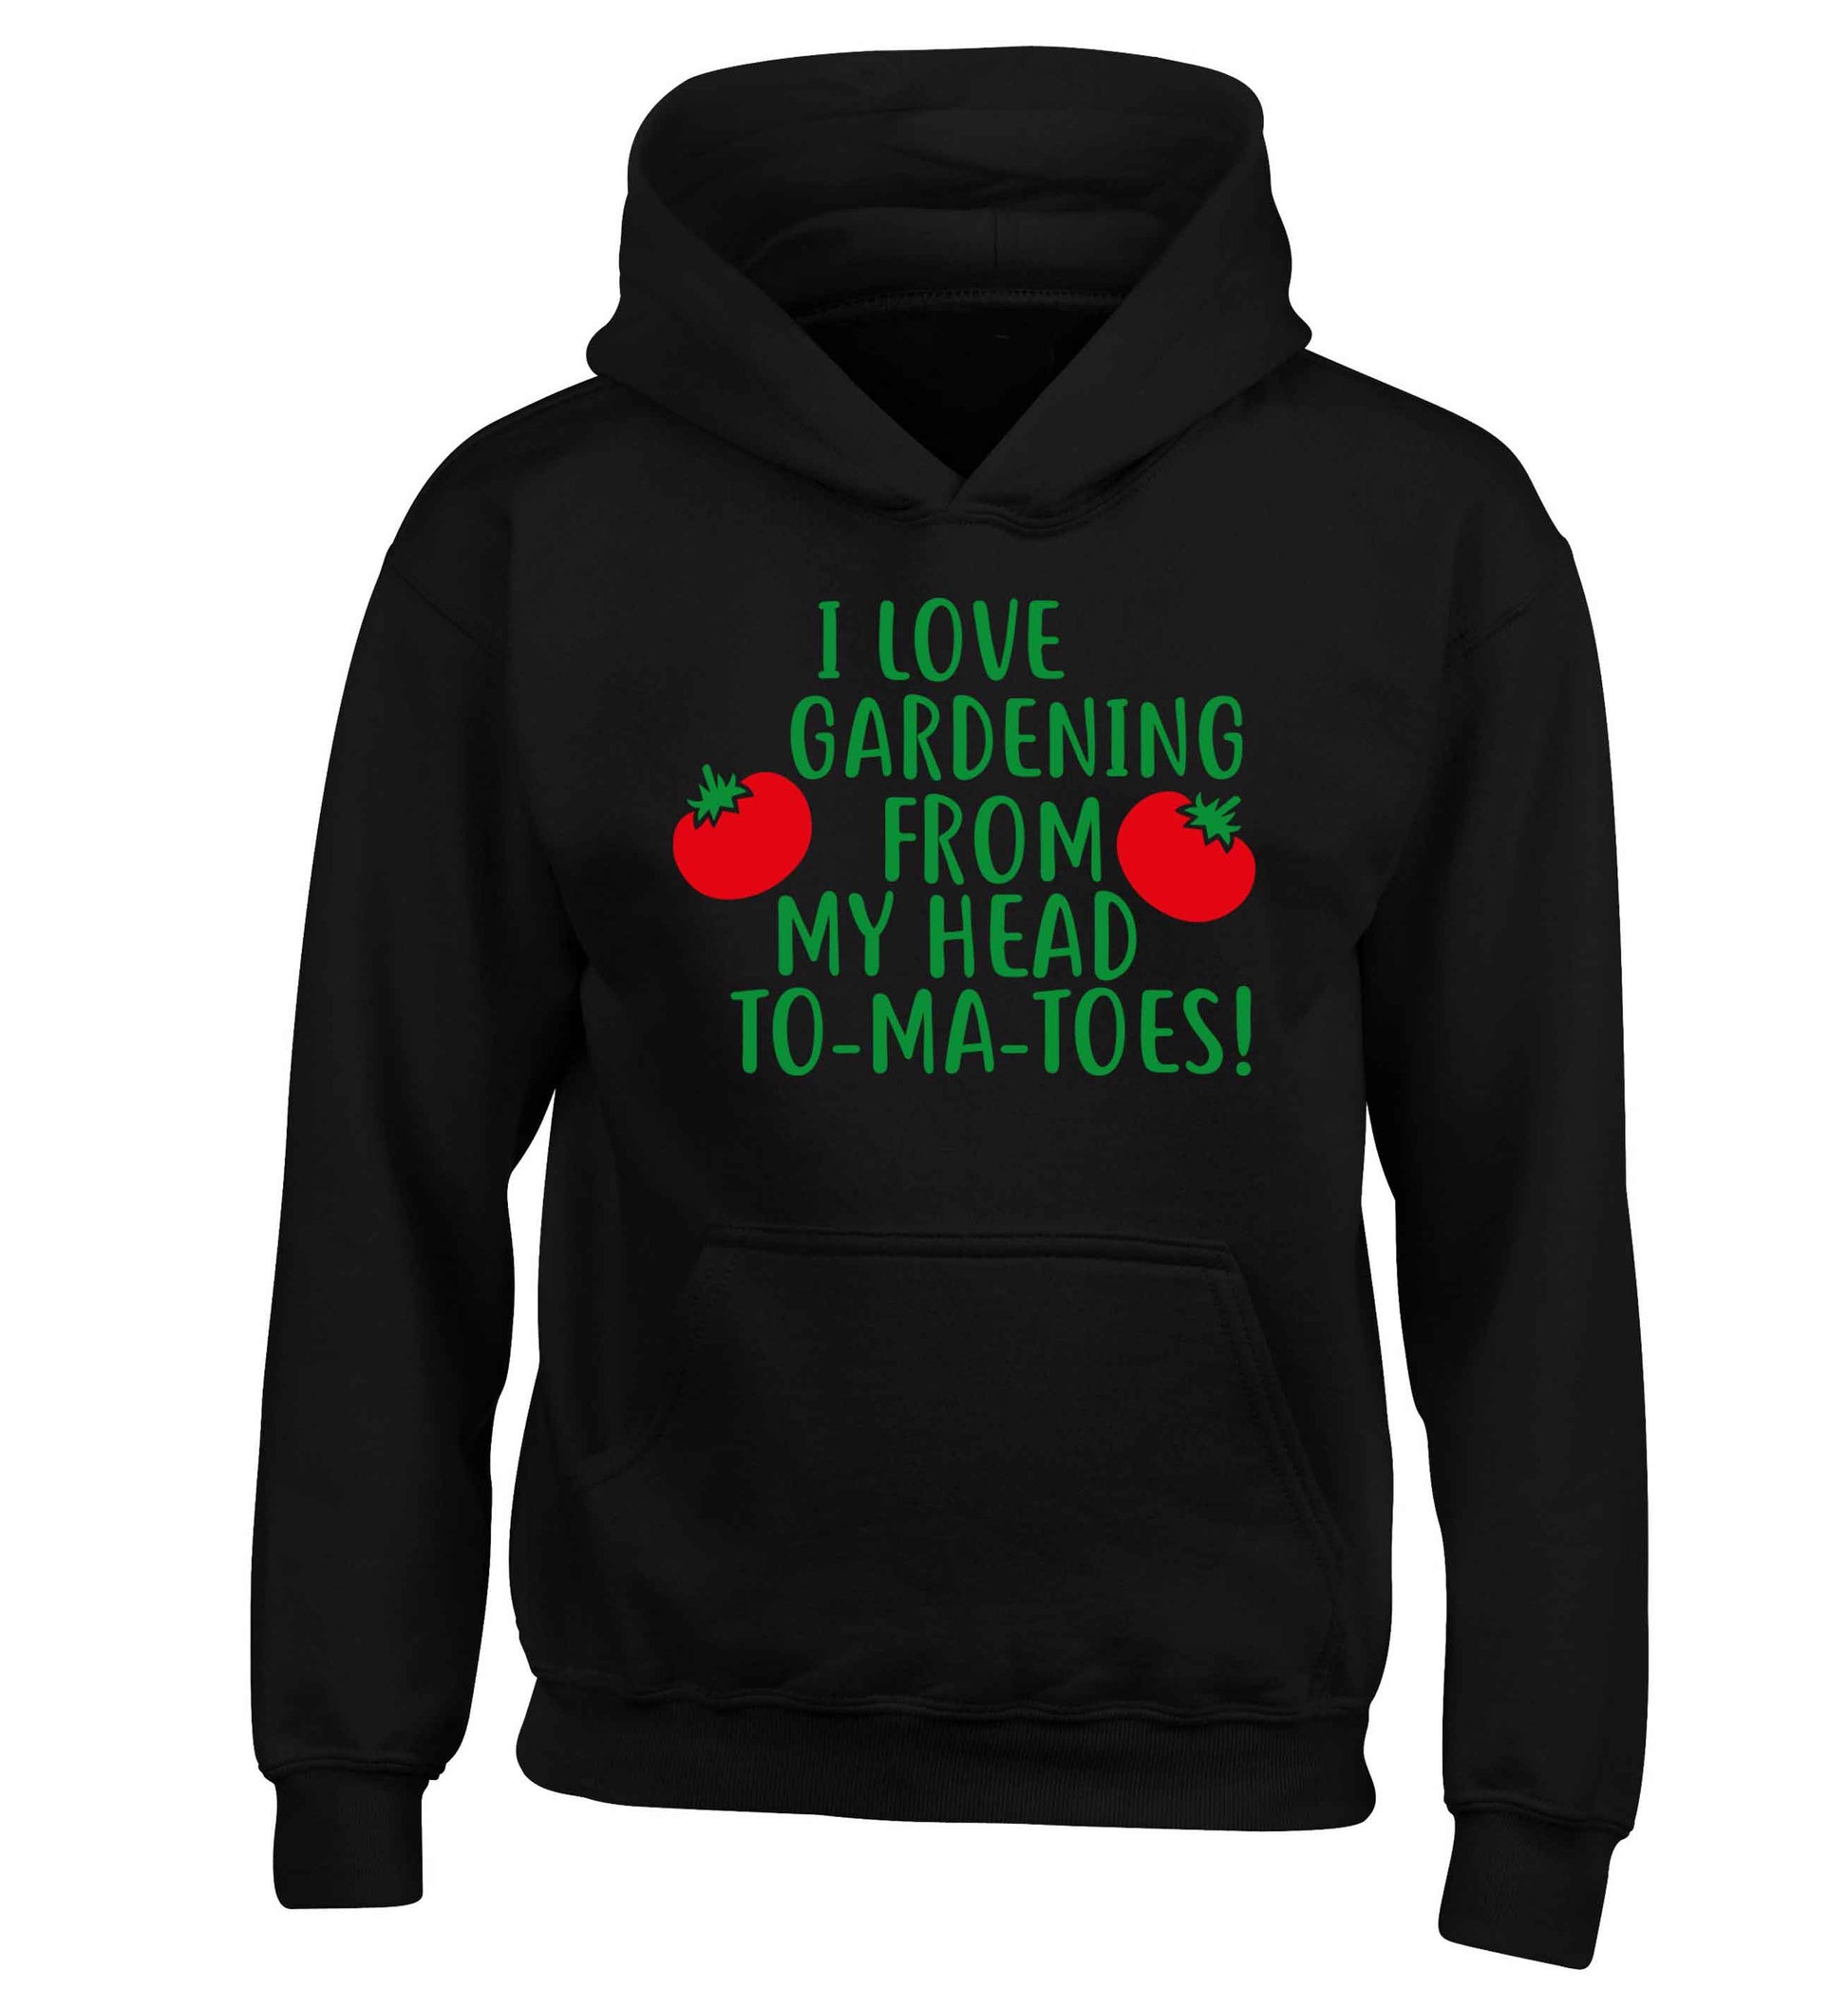 I love gardening from my head to-ma-toes children's black hoodie 12-13 Years